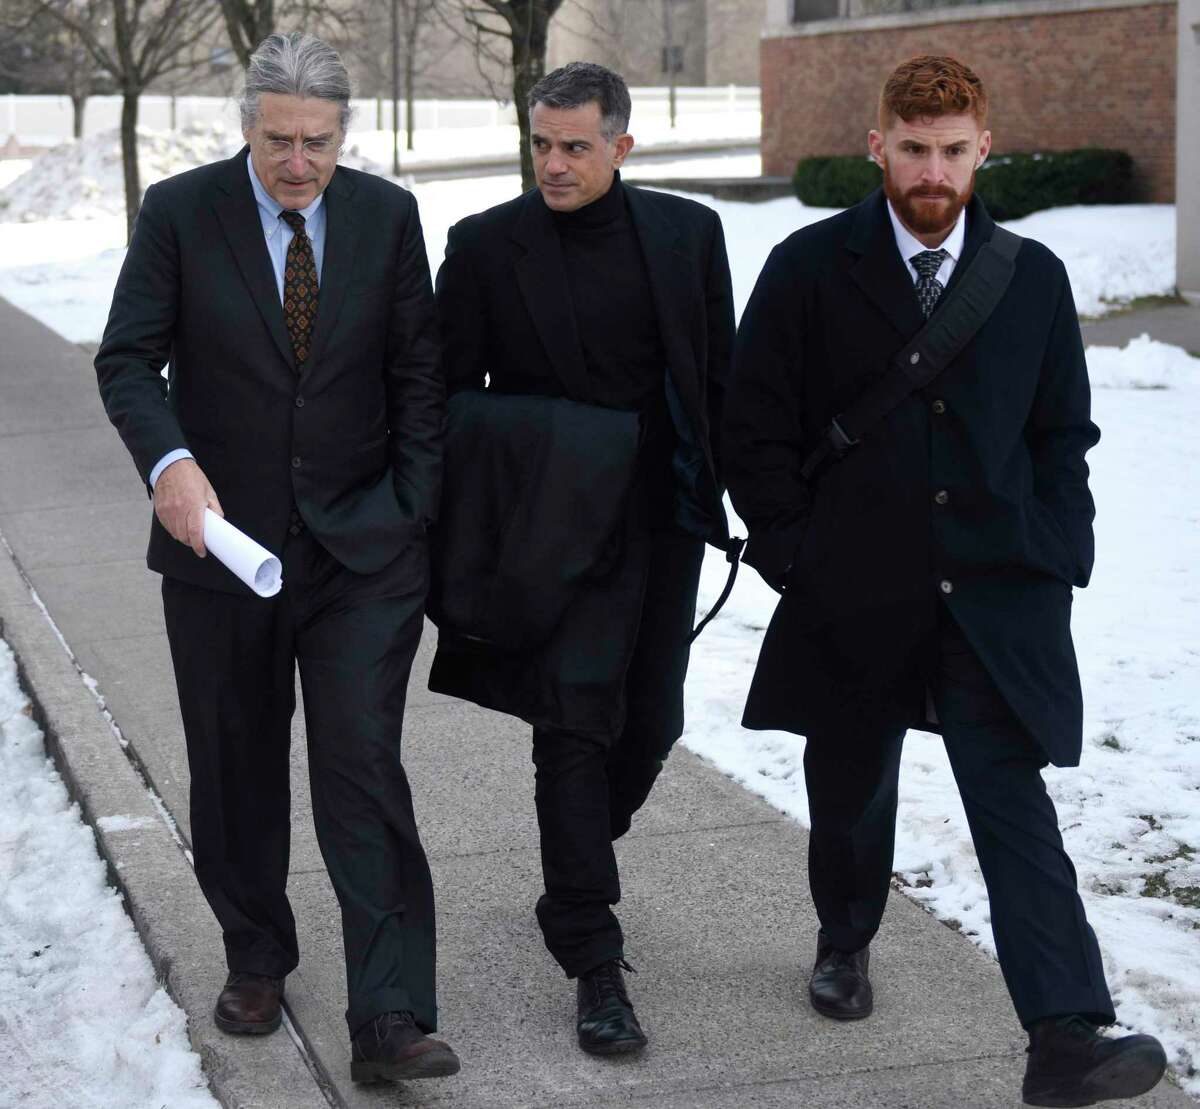 Fotis Dulos, center, leaves after his murder case hearing with attorneys Norm Pattis, left and Chris La Tronica at Connecticut Superior Court in Stamford, Conn. Thursday, Jan. 23, 2020.